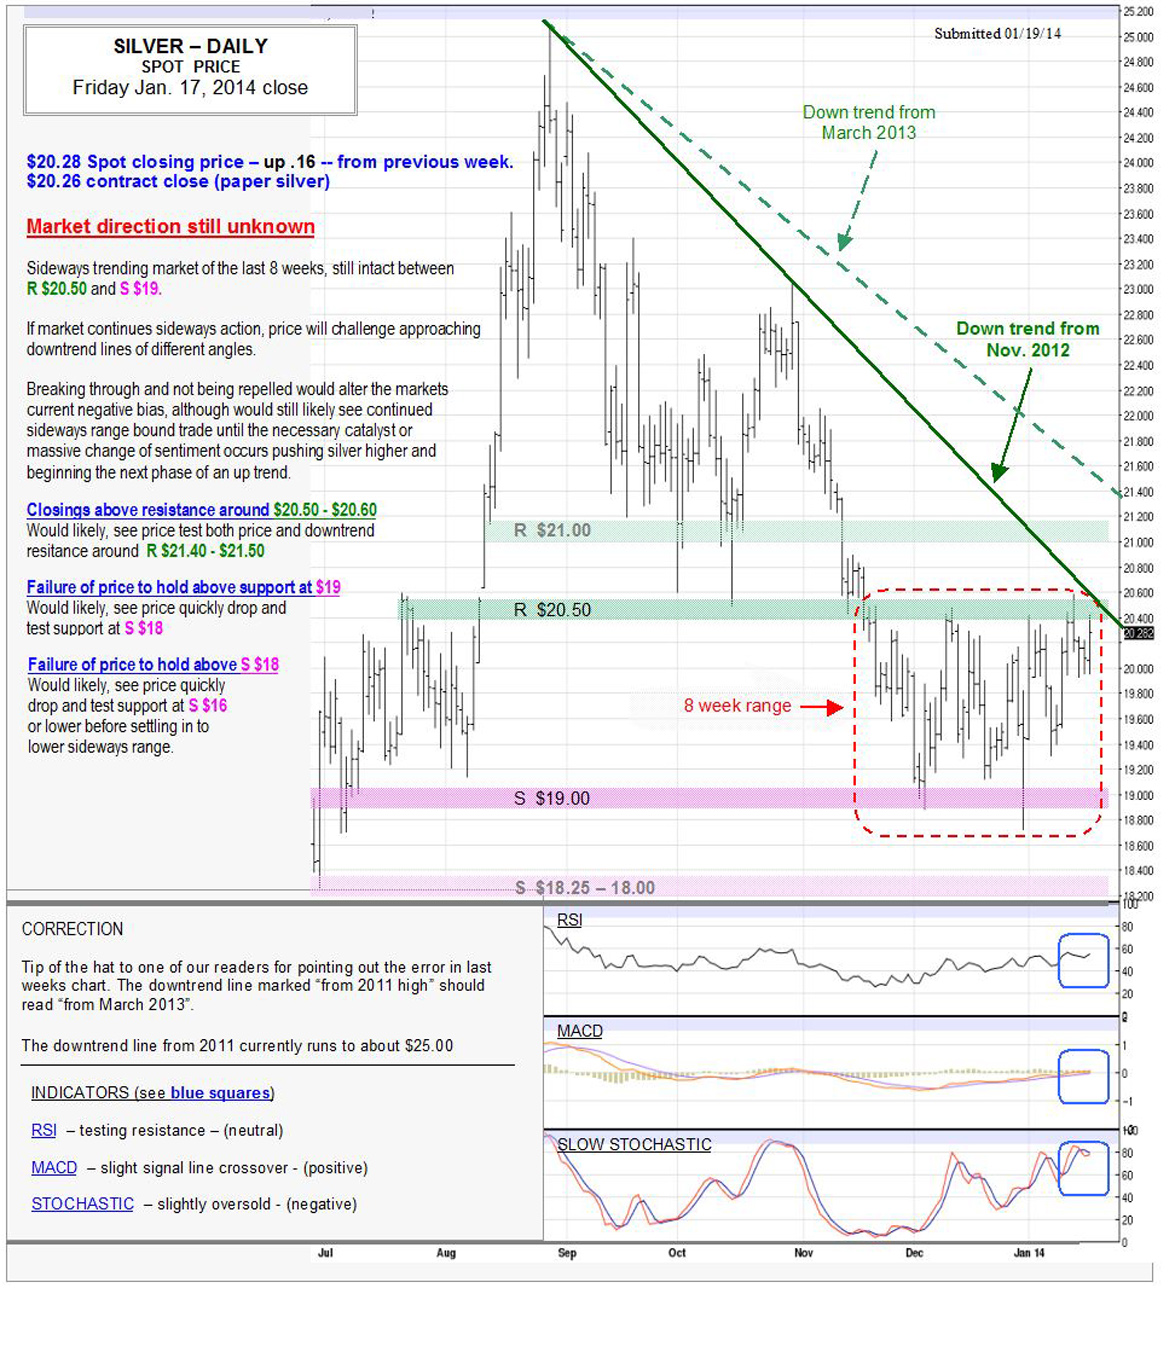 Jan 17, 2014 chart & commentary